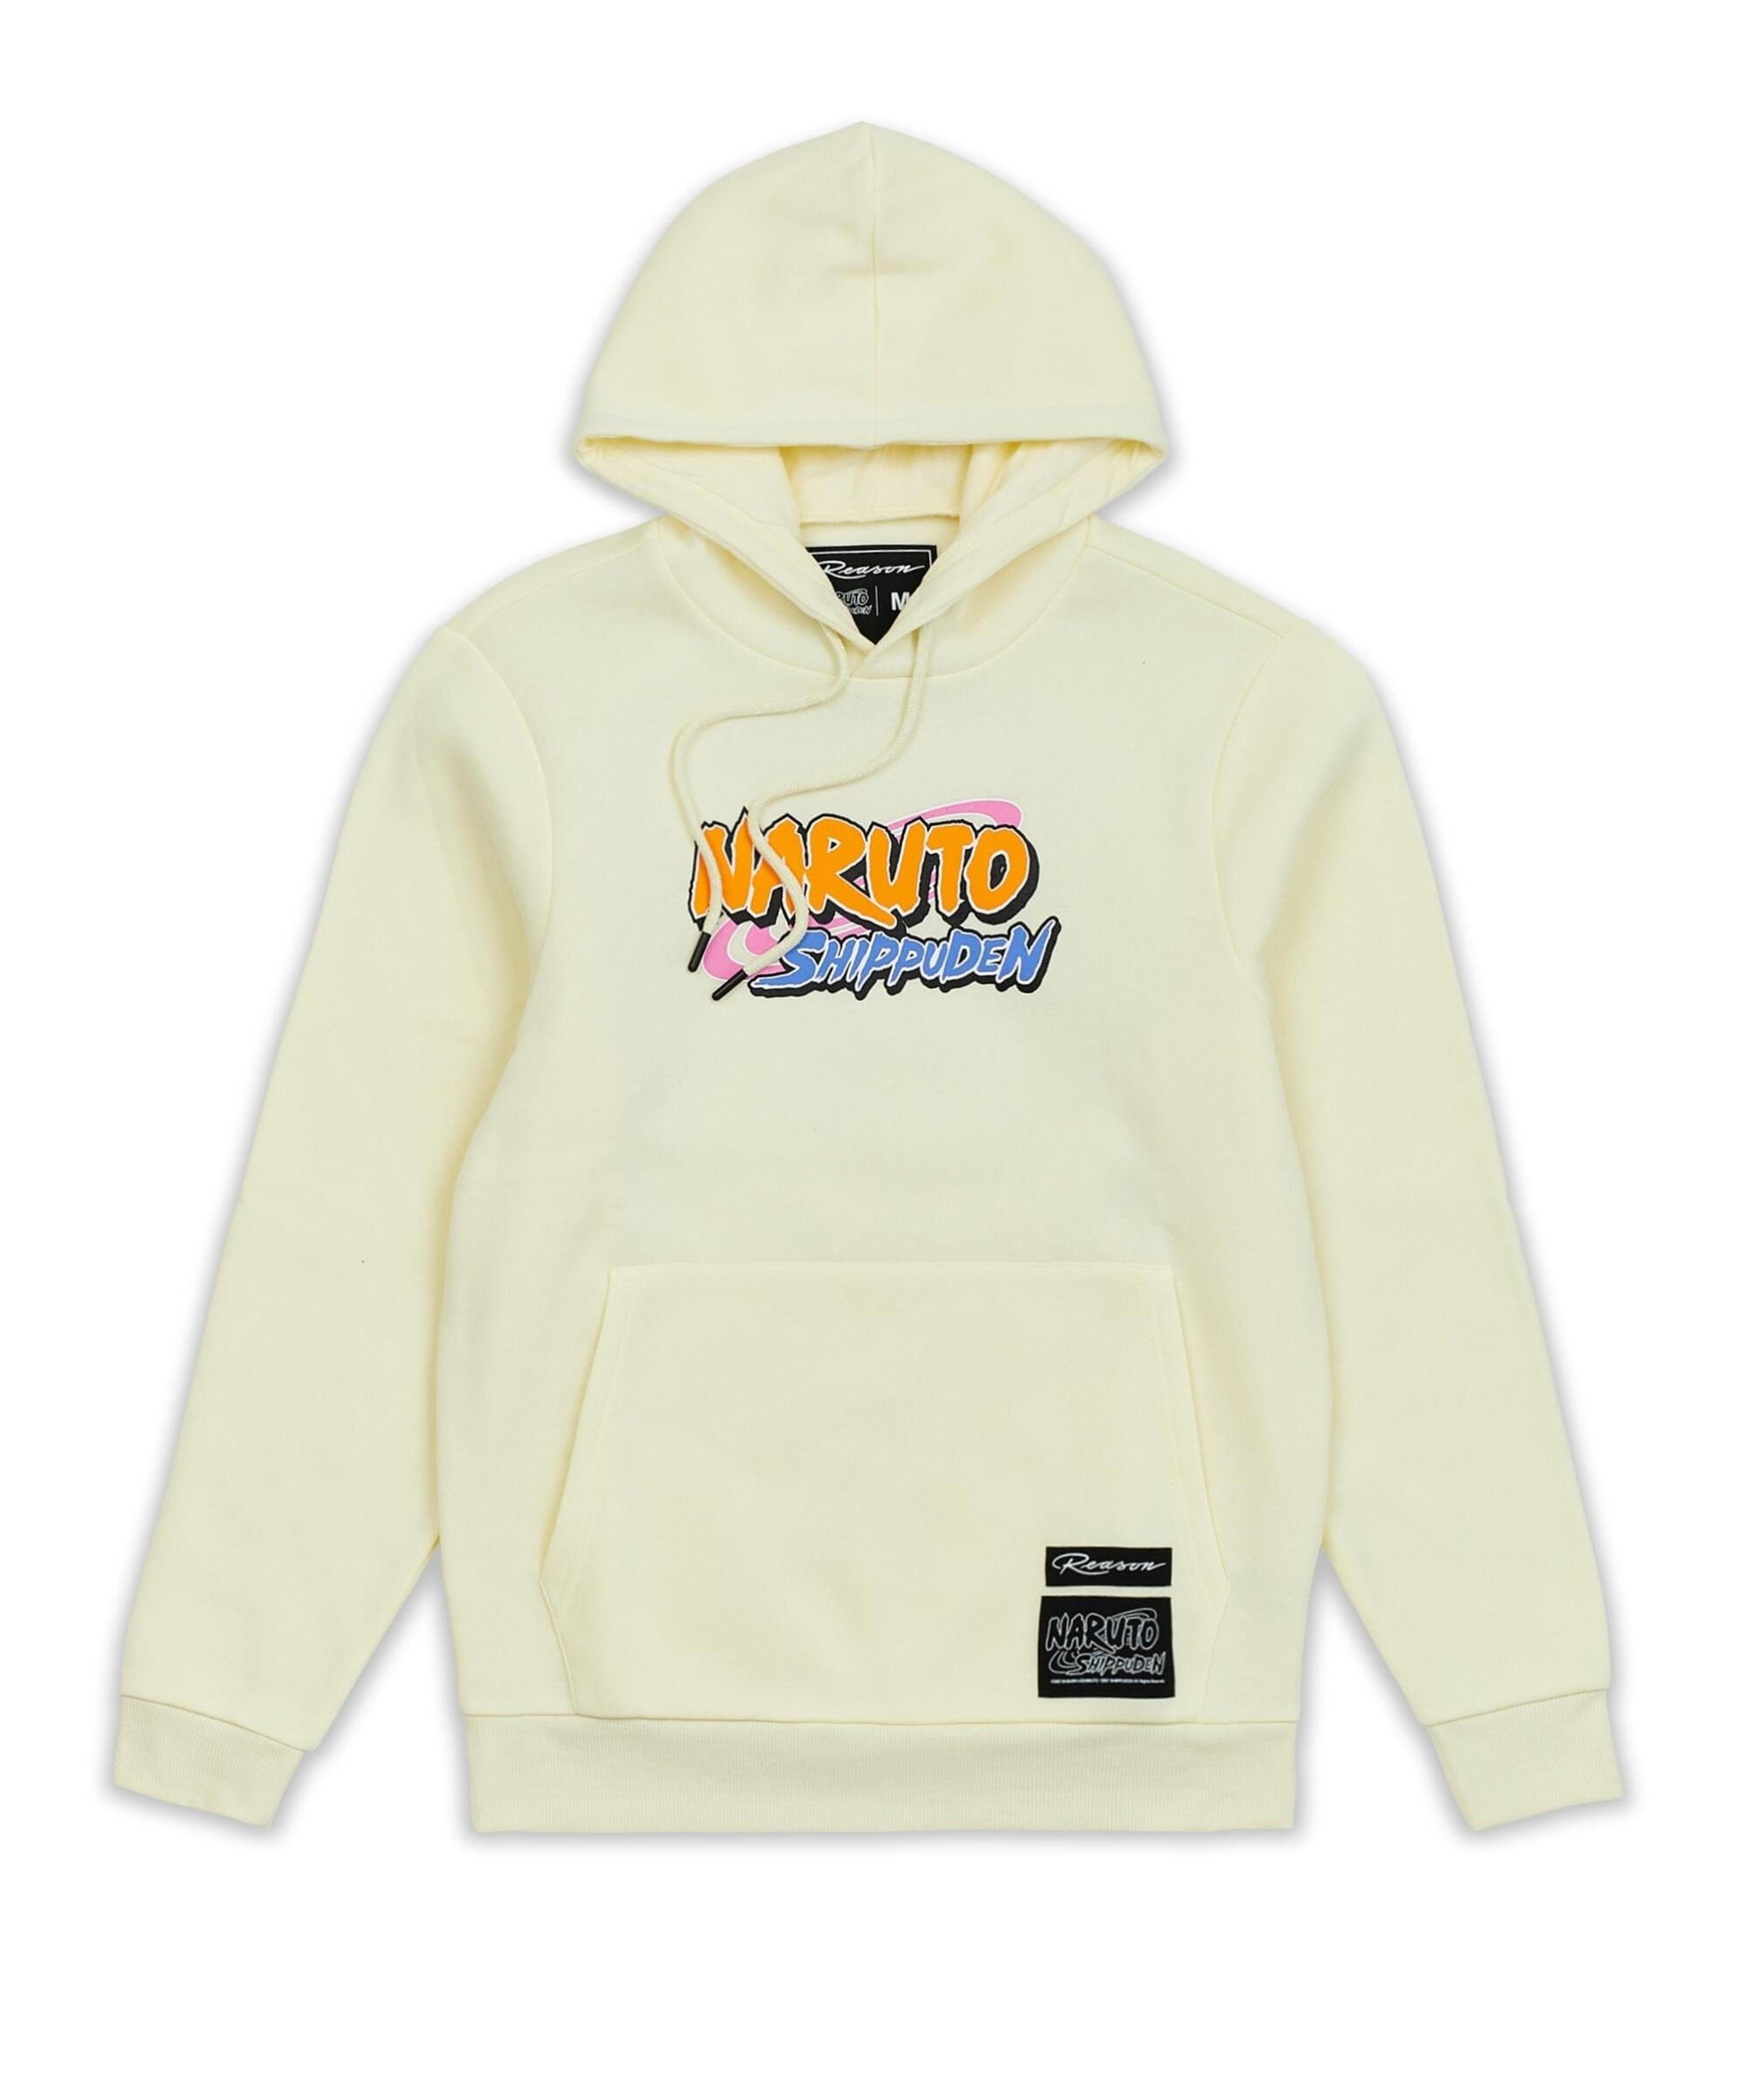 Alternate View 3 of Naruto Alumni Hoodie With Front Graphic Print